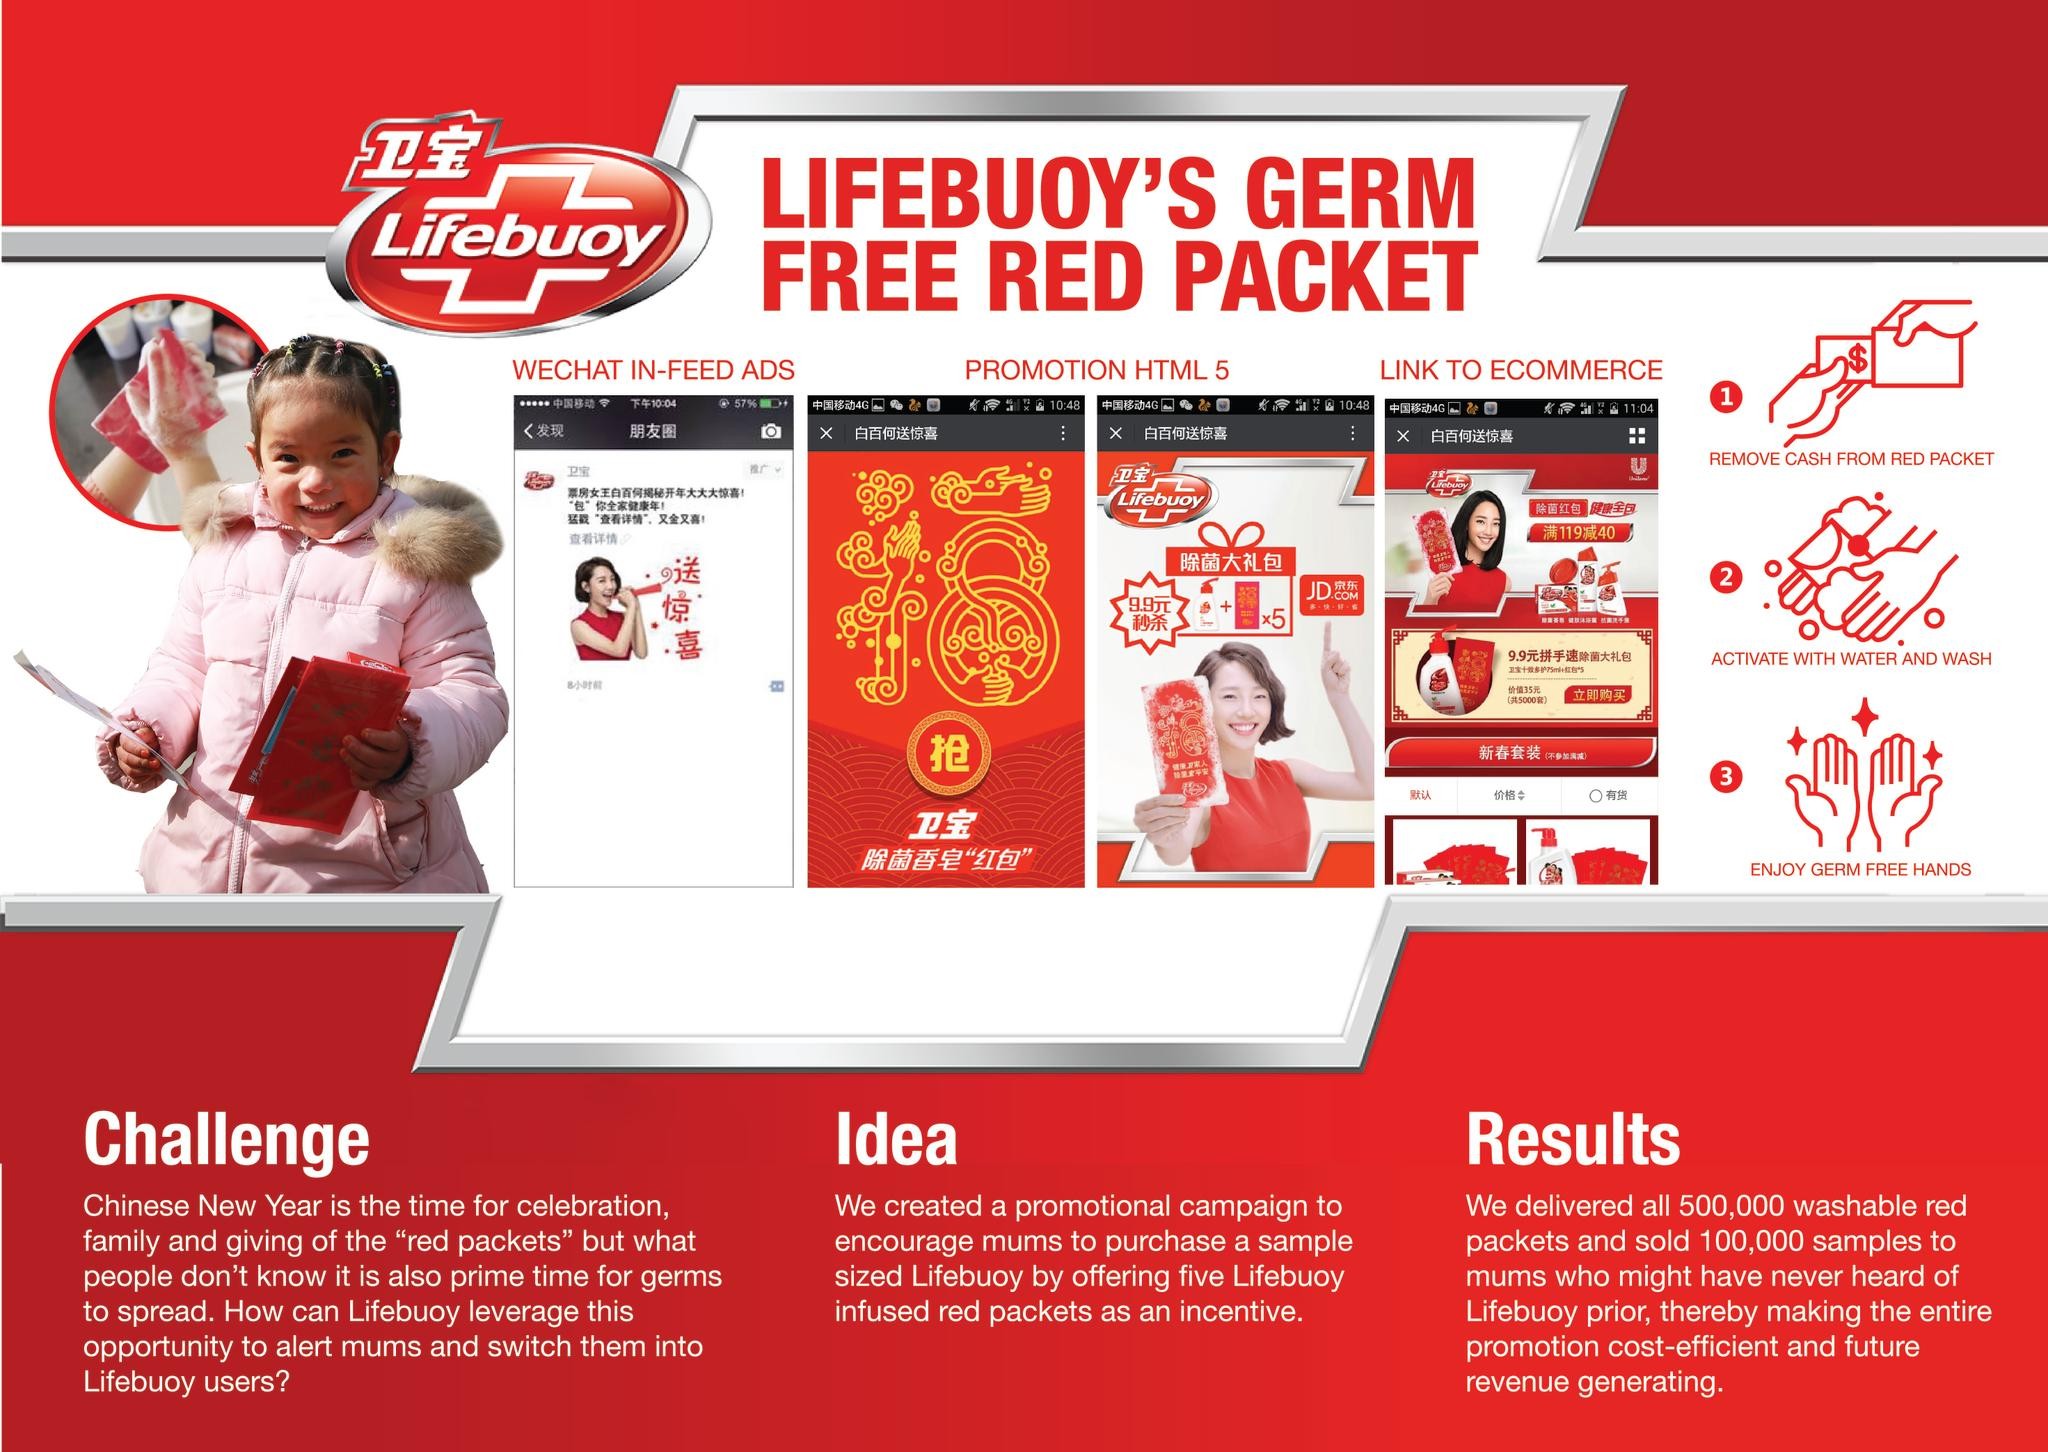 Lifebuoy's Germ Free Red Packet